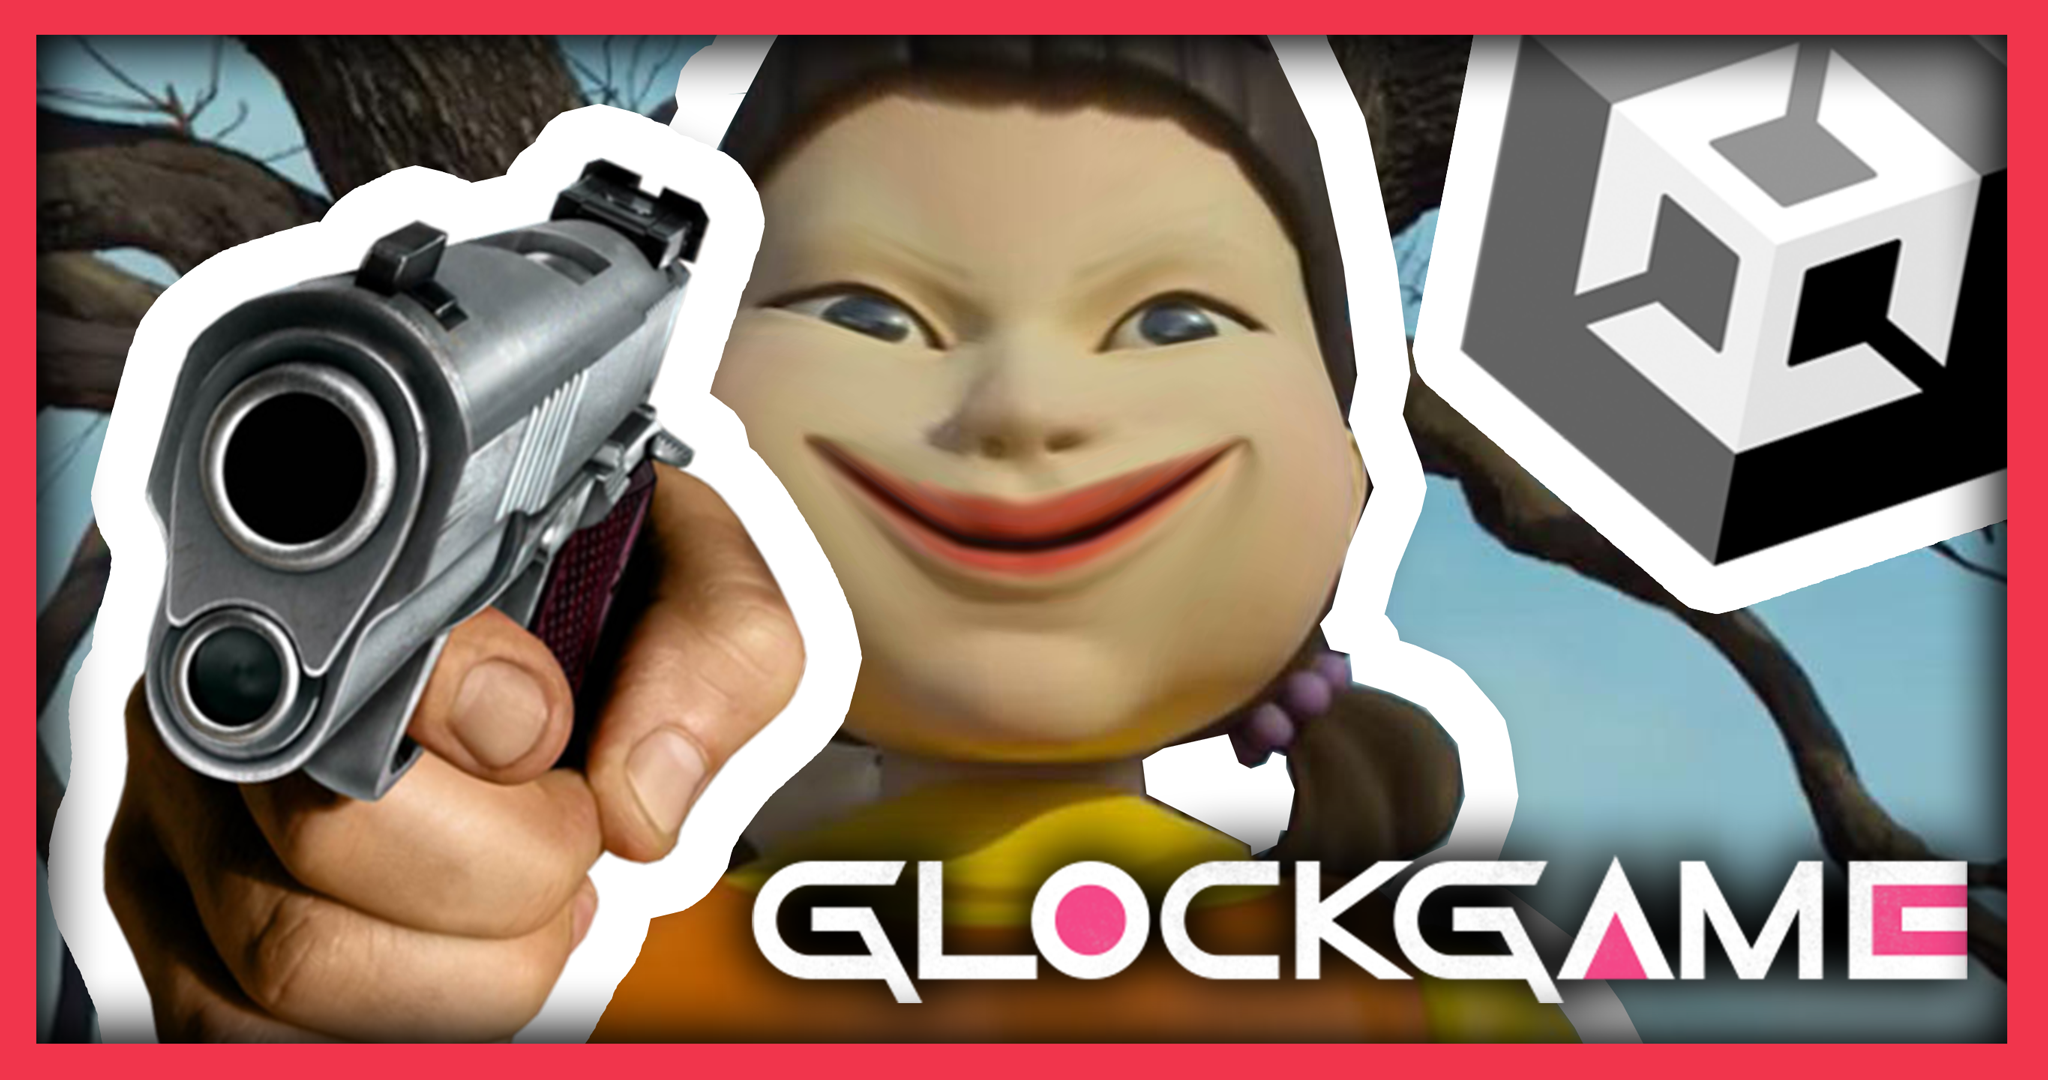 GLOCK GAME - The Squid Game Online FPS